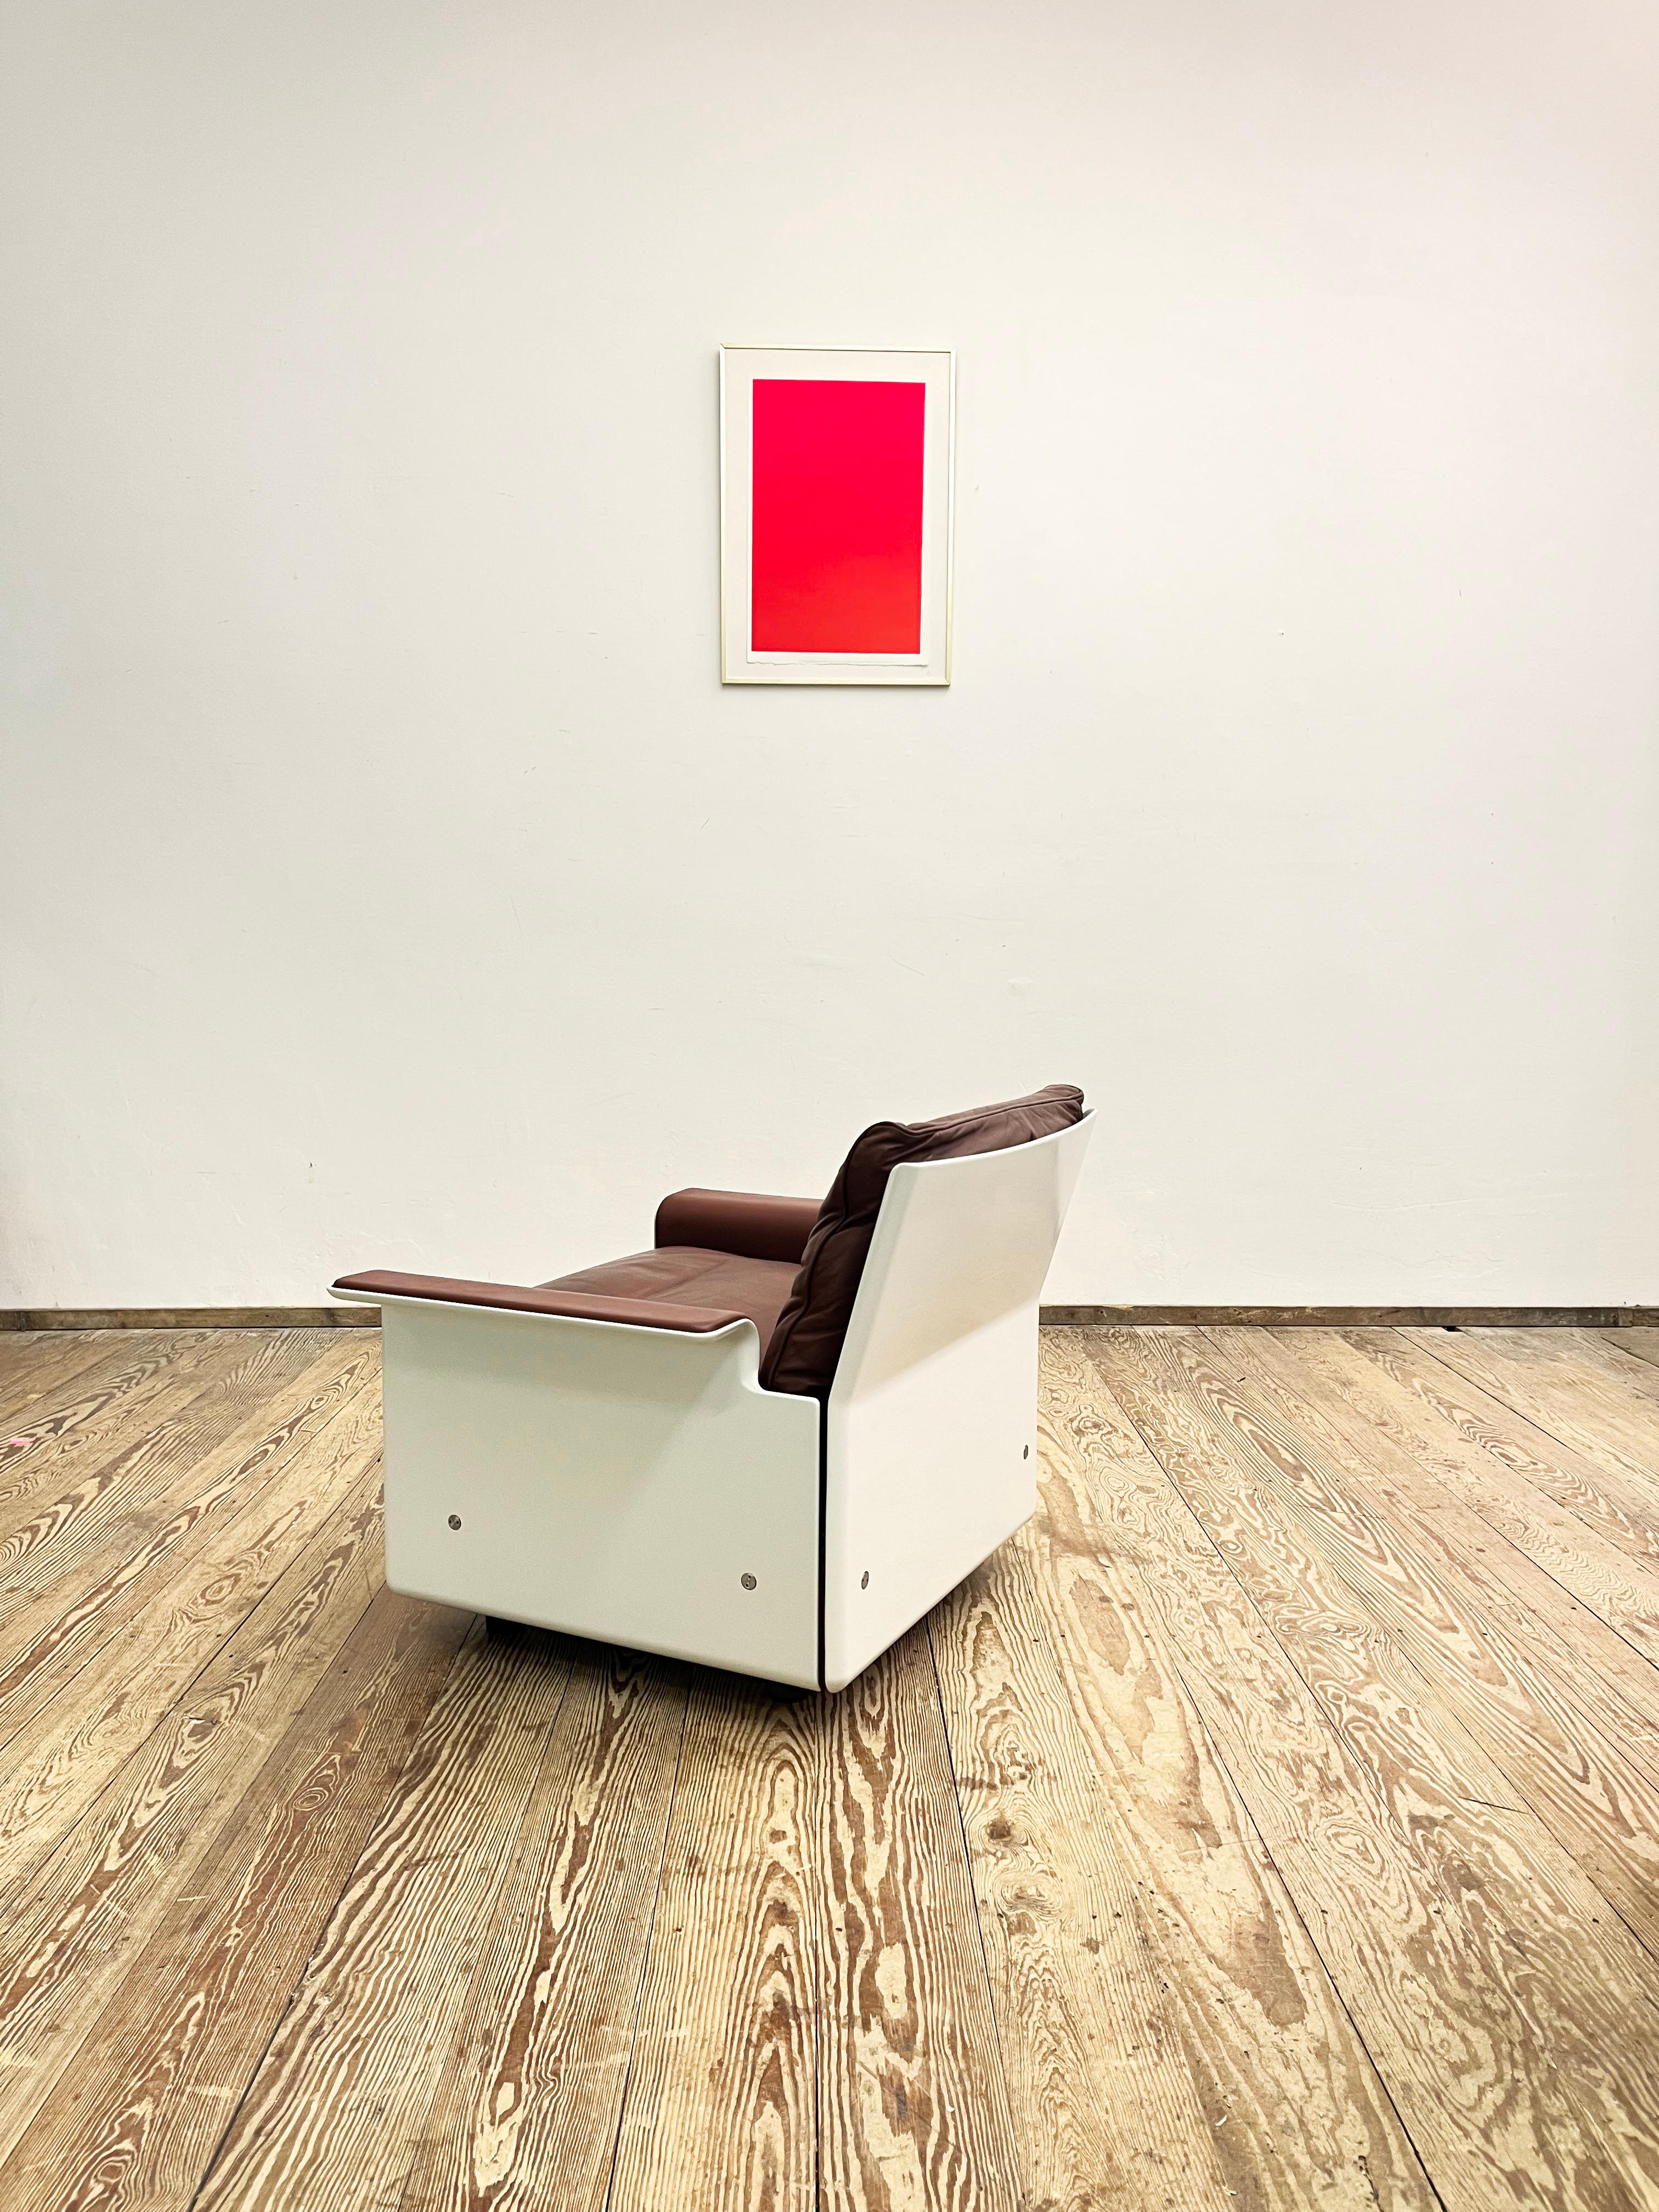 Mid-20th Century Mid-Century Lounge or Armchair by Dieter Rams for Vitsoe, German Design, 1960s